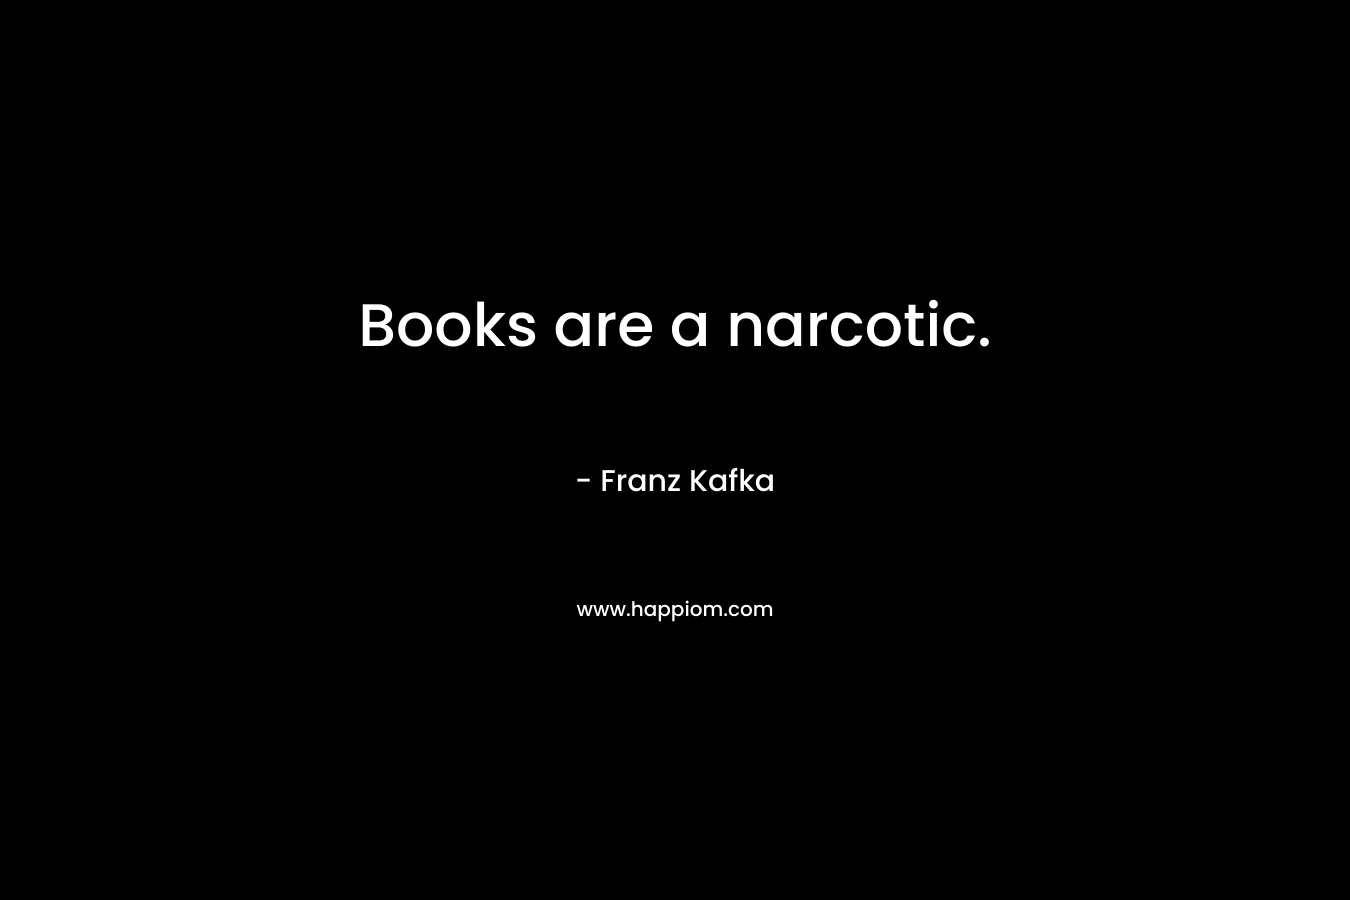 Books are a narcotic.